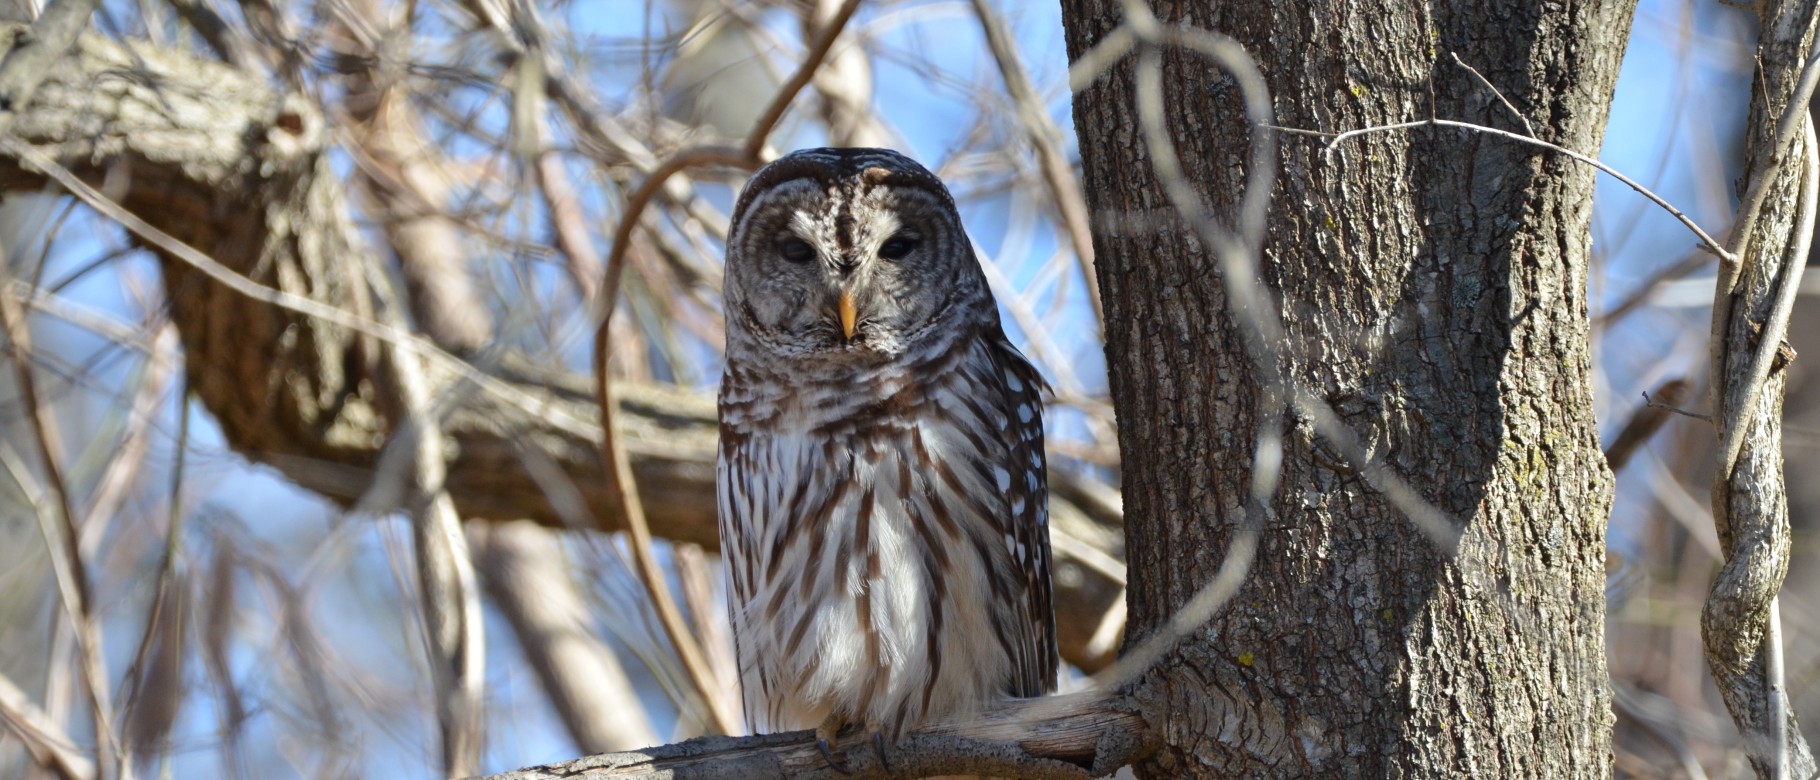 A barred owl is perched upon a tree branch